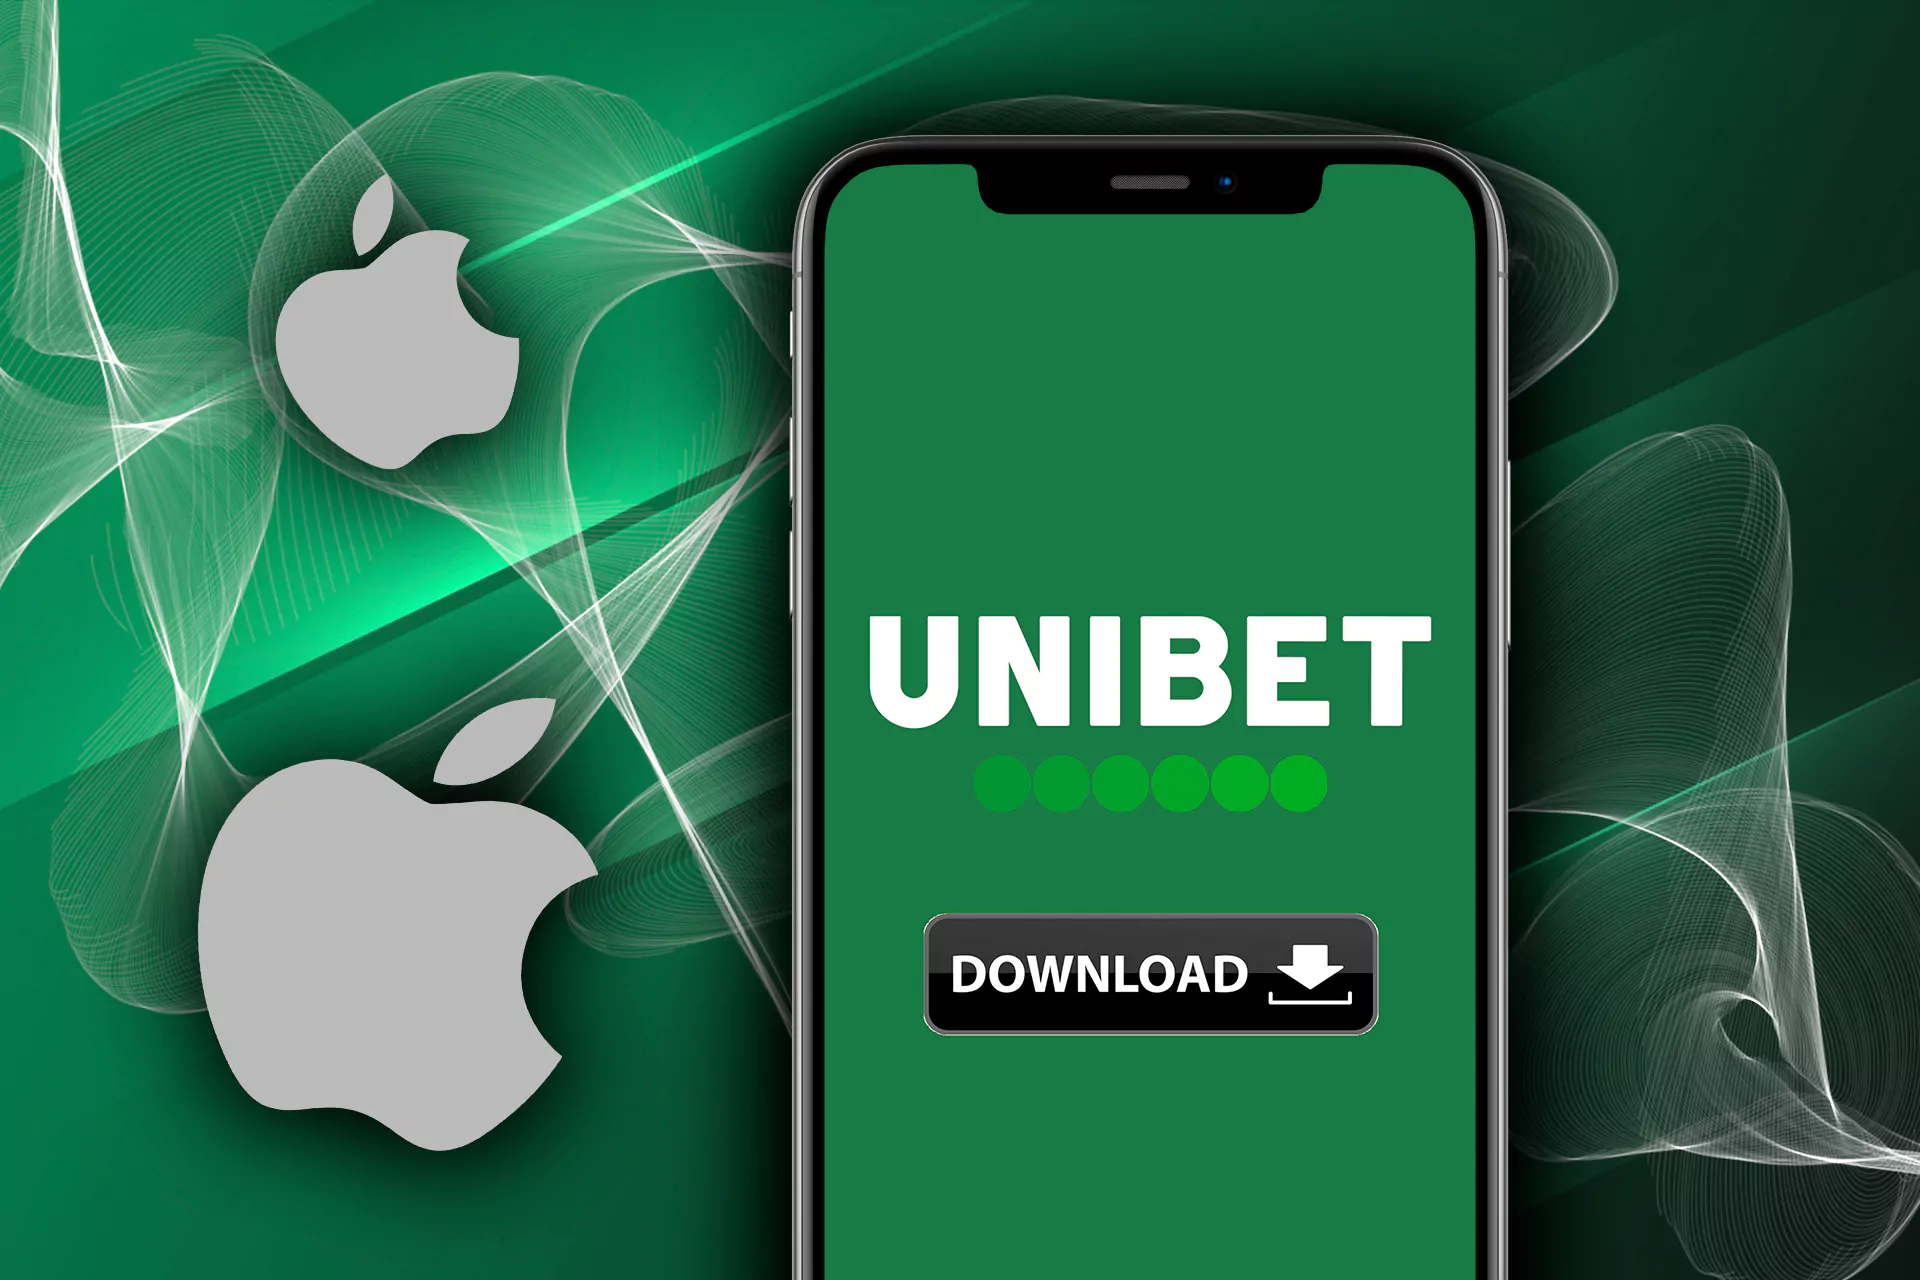 Once you install the Unibet app you will be able to place bet via your iPhone whenever you want.